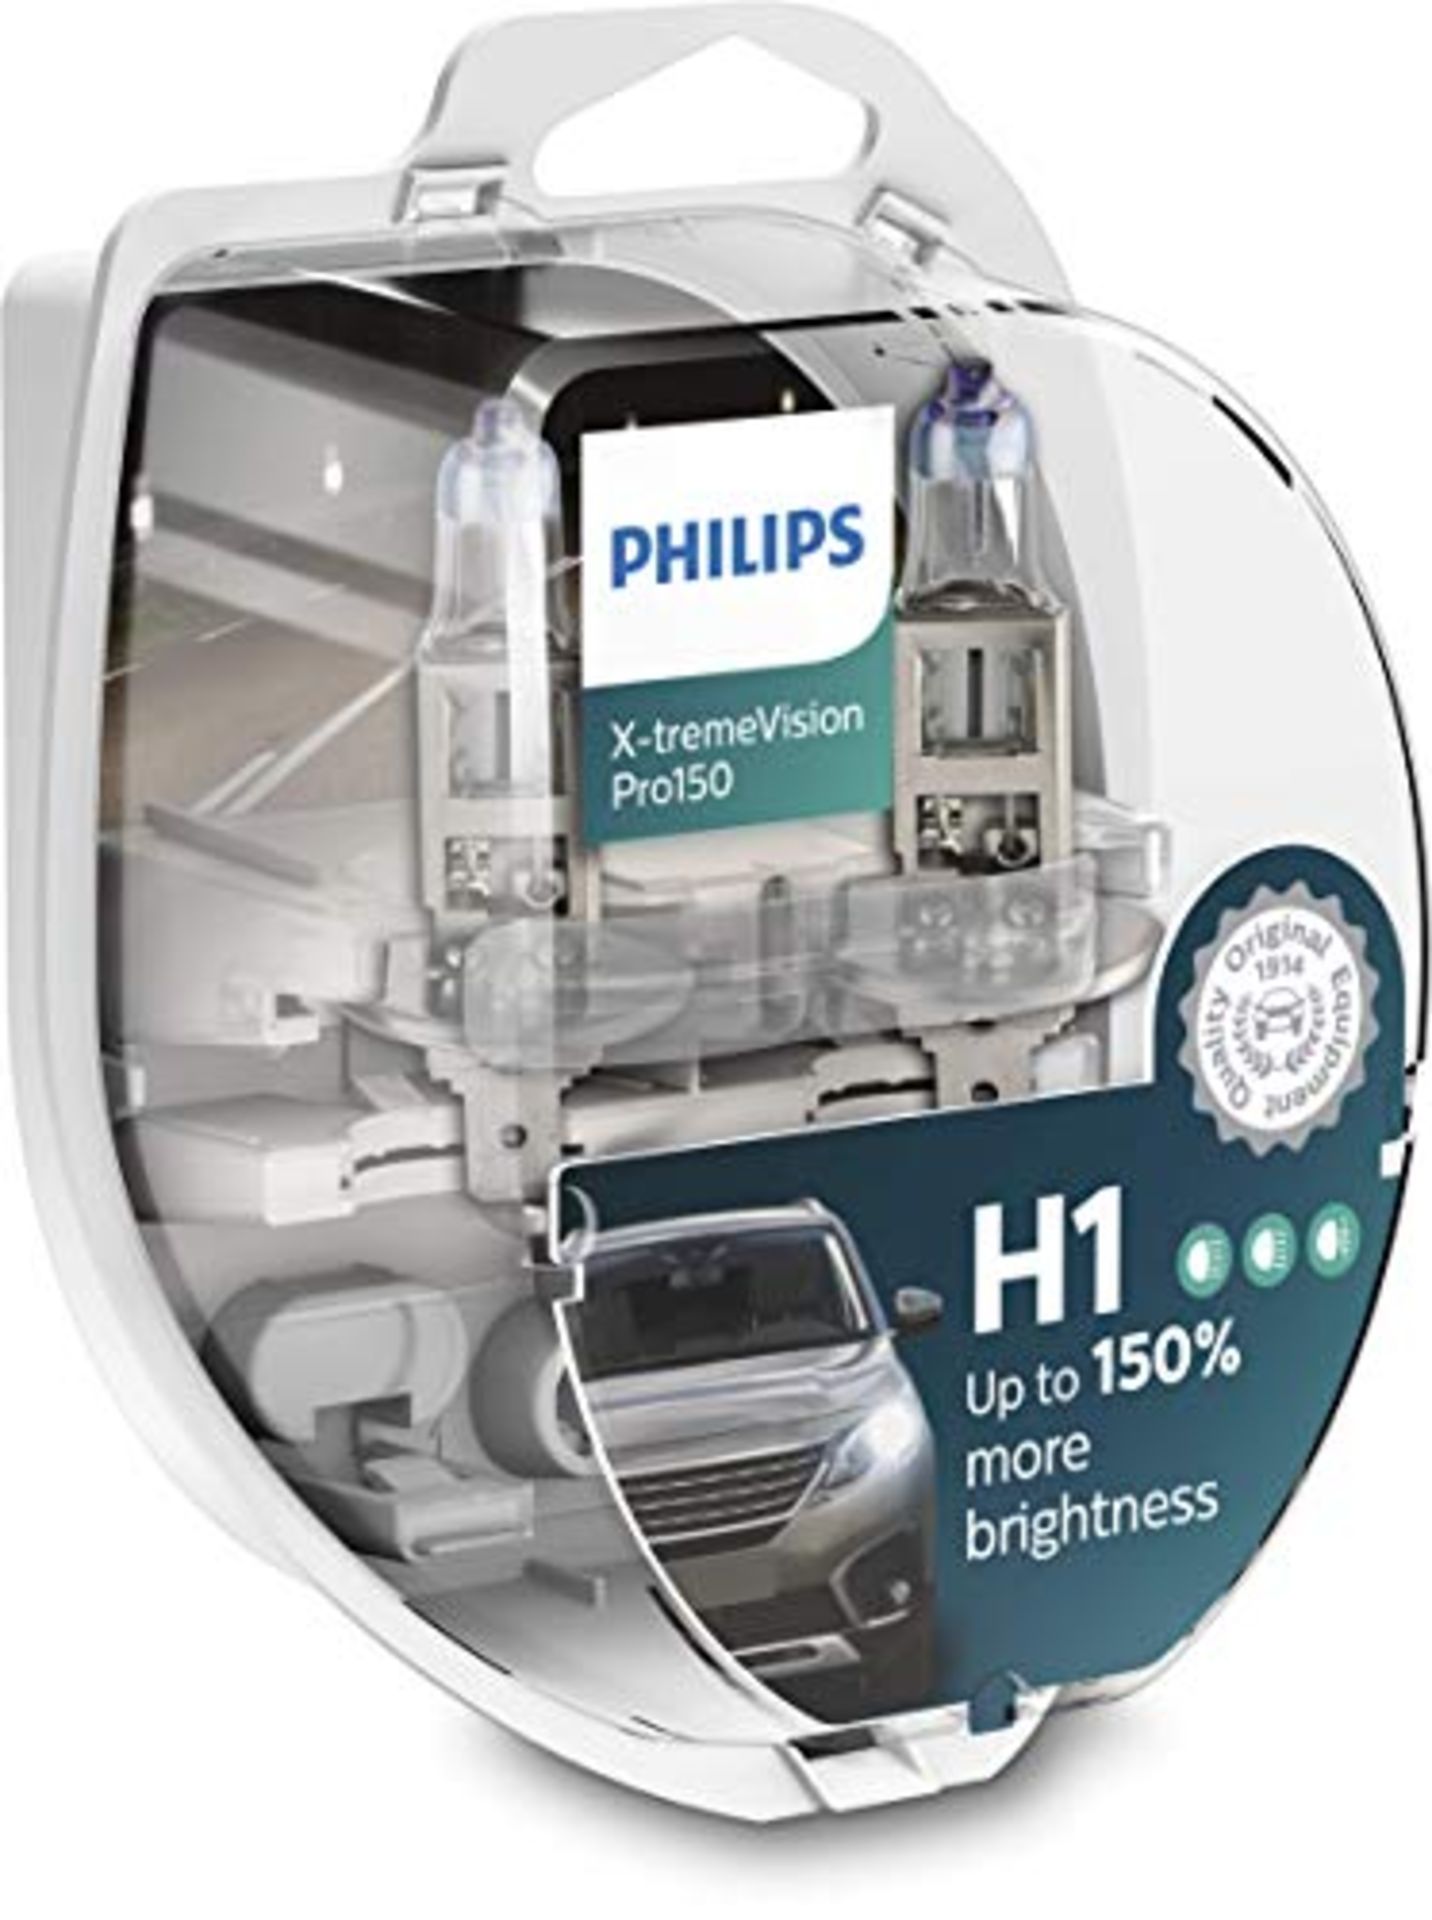 Philips X-tremeVision Pro150 H1 car headlights bulb +150%, double pack